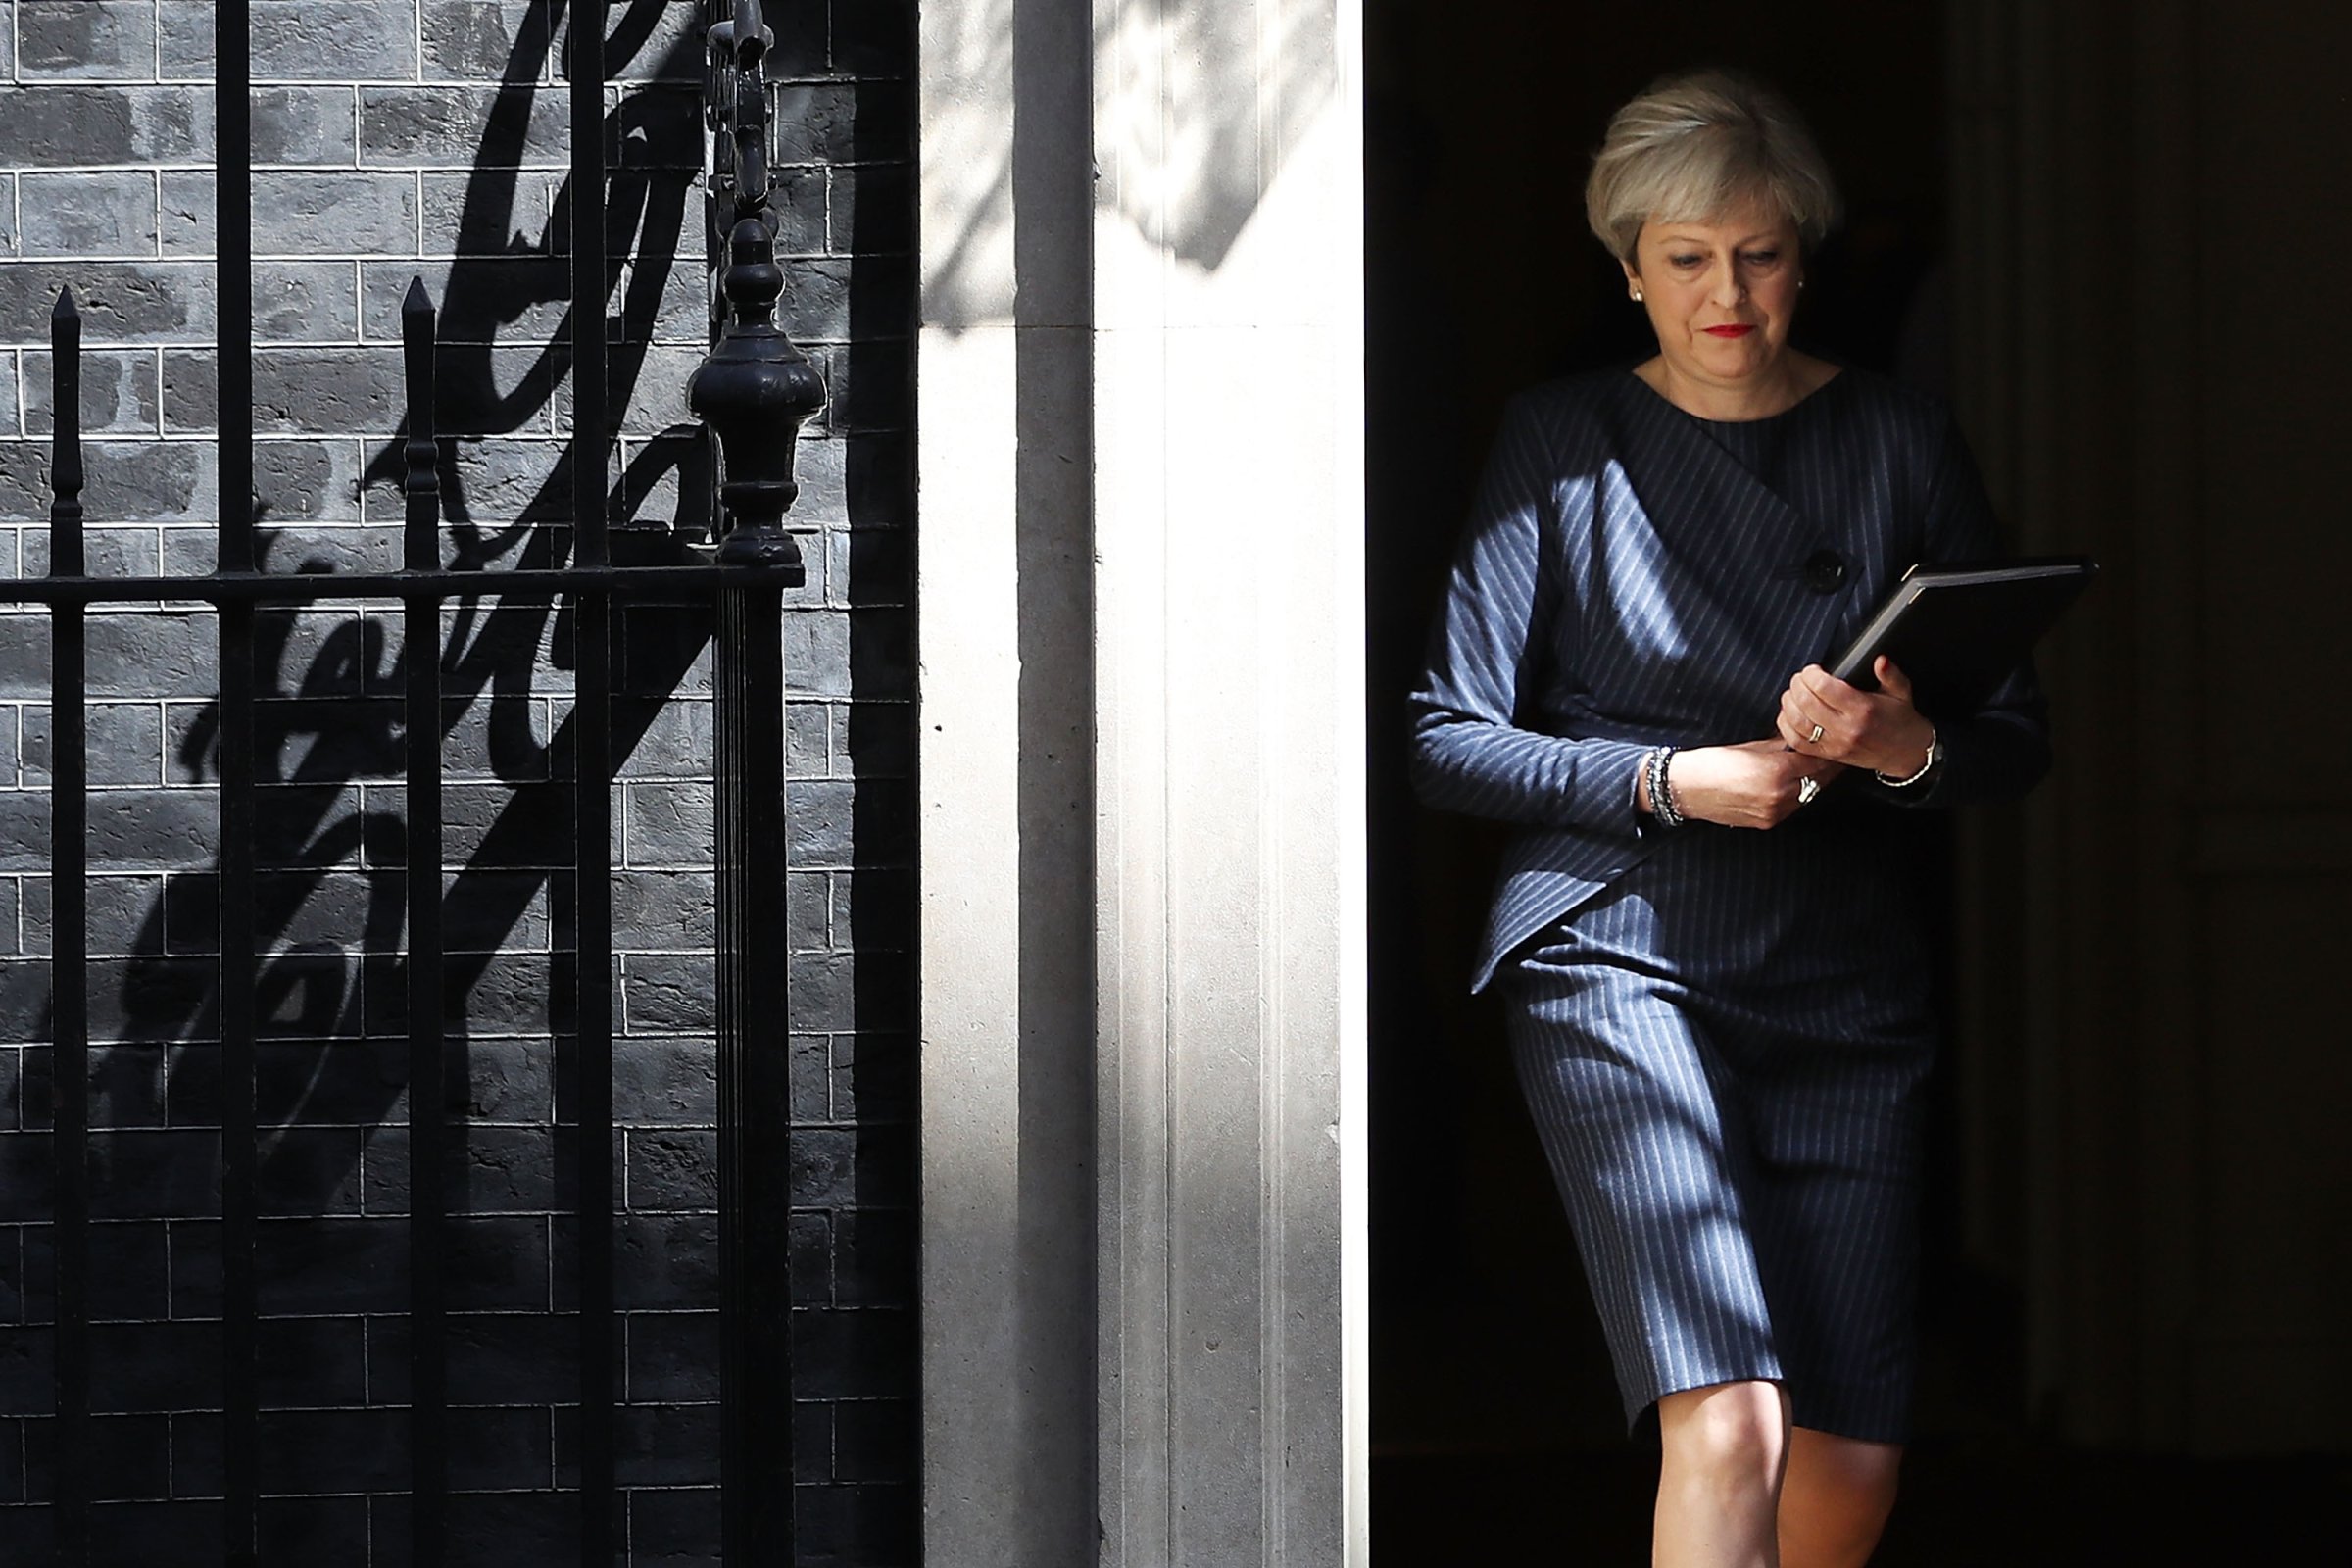 Prime Minister Theresa May prepares to make a statement to the nation in Downing Street on April 18, 2017 in London, United Kingdom.